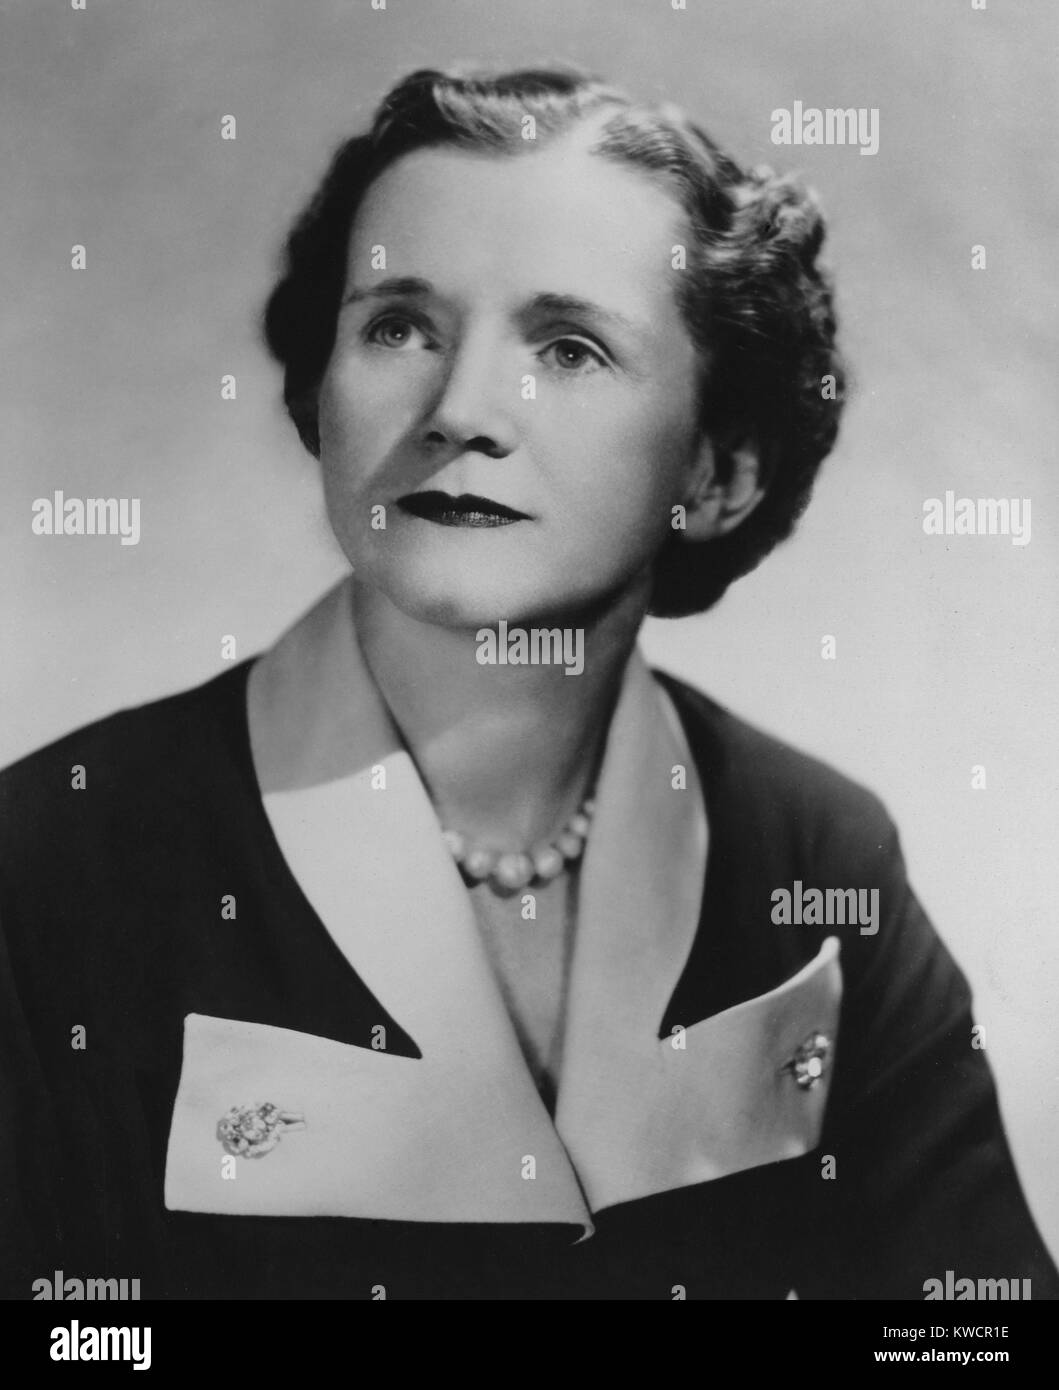 Marine biologist Rachel Carson, after she published her first book 'The Sea Around Us' in 1951. The book was a best seller and won the 1952 National Book Award for Nonfiction. Carson sold the rights for a film version was filmed which won the 1953 Oscar for Best Documentary. Her second best selling book was 'Silent Spring' 1963. - (BSLOC 2015 1 59) Stock Photo